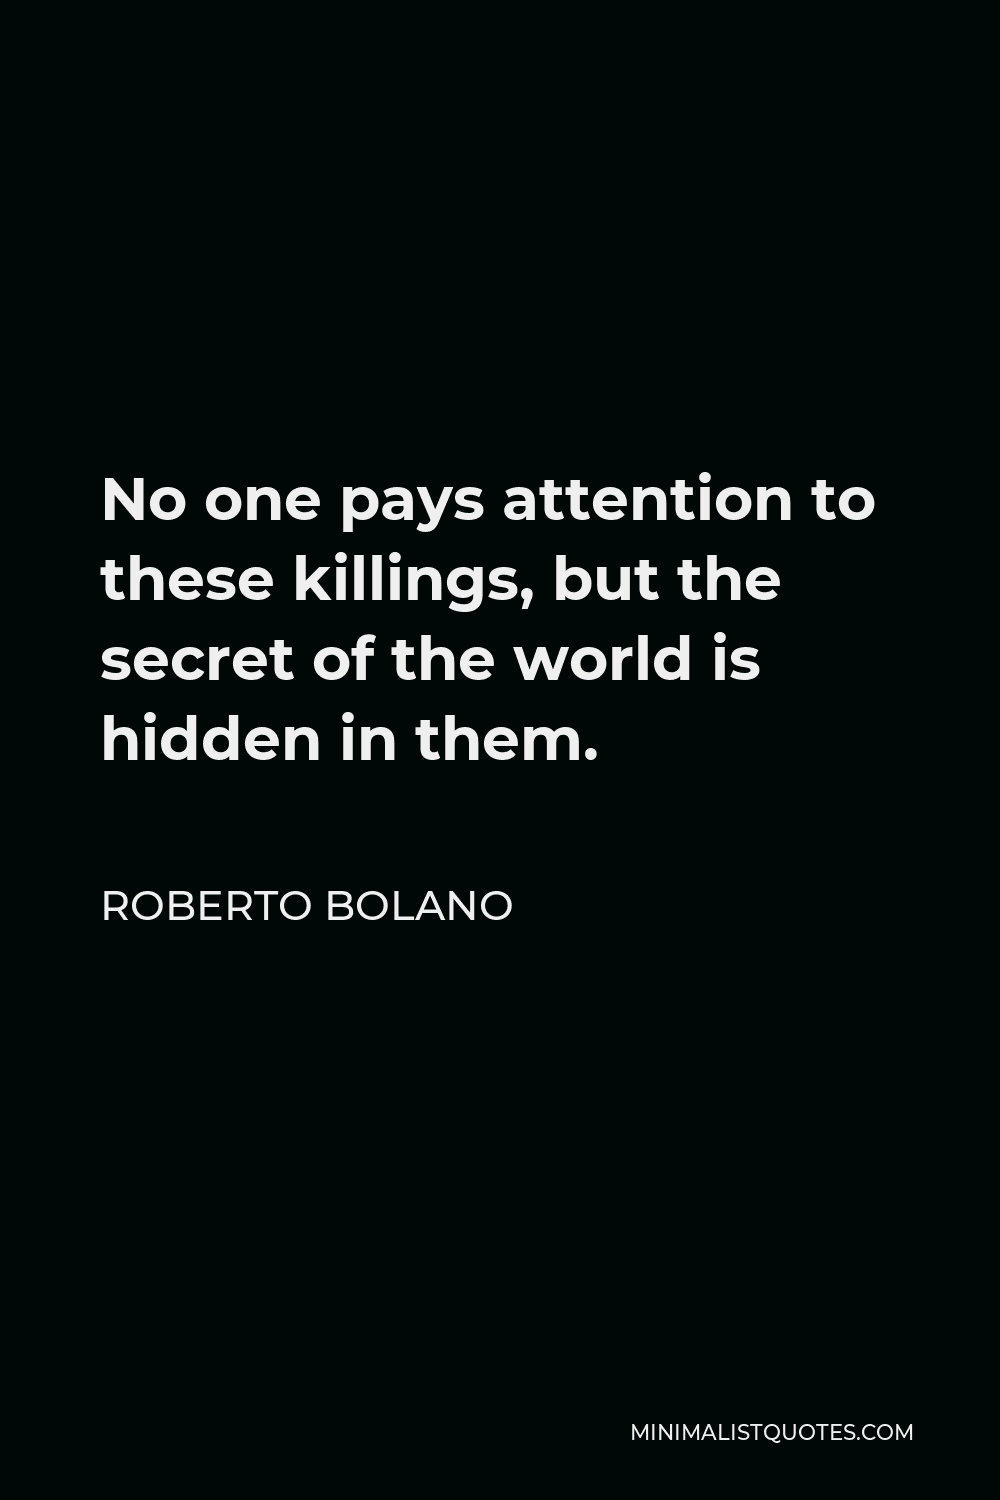 Roberto Bolano Quote - No one pays attention to these killings, but the secret of the world is hidden in them.